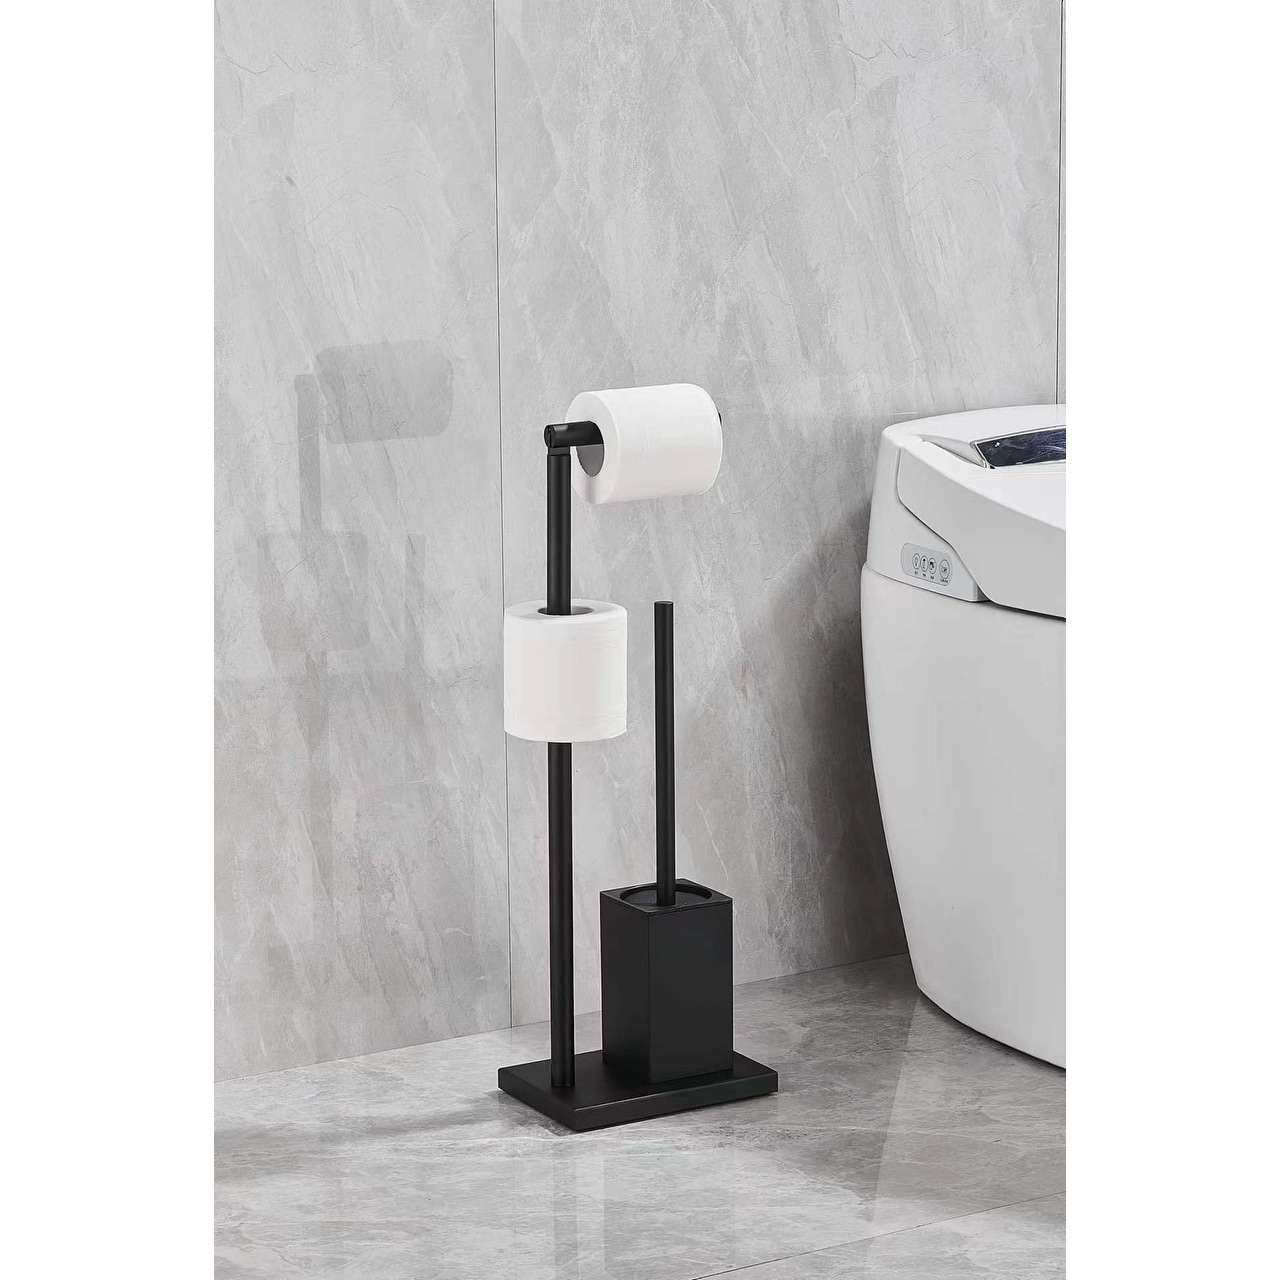 https://ak1.ostkcdn.com/images/products/is/images/direct/5c140211b7ee70860b6b8d741dbd96954b553851/Freestanding-Toilet-Paper-Holder-With-Brush-in-Matte-Black.jpg